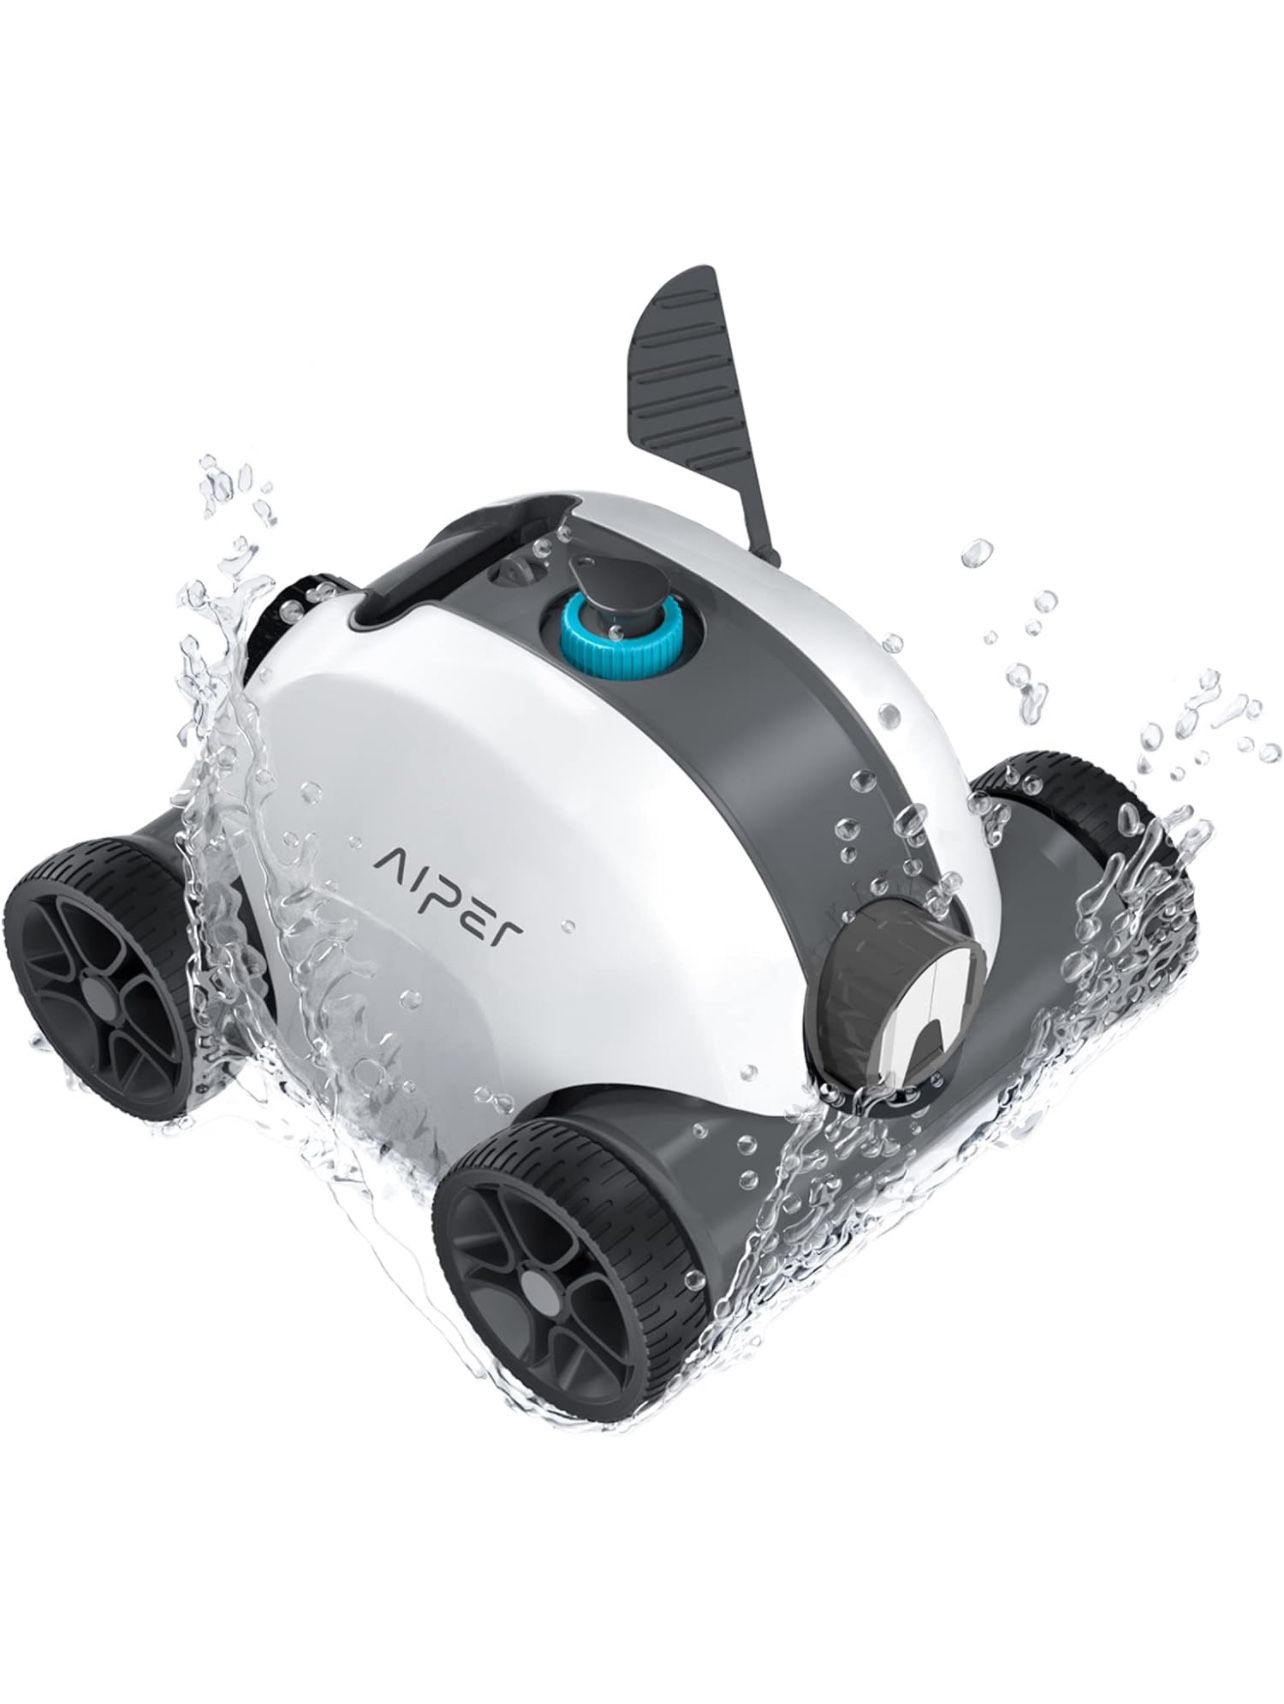 aiper cordless robotic pool cleaner seagull 1000